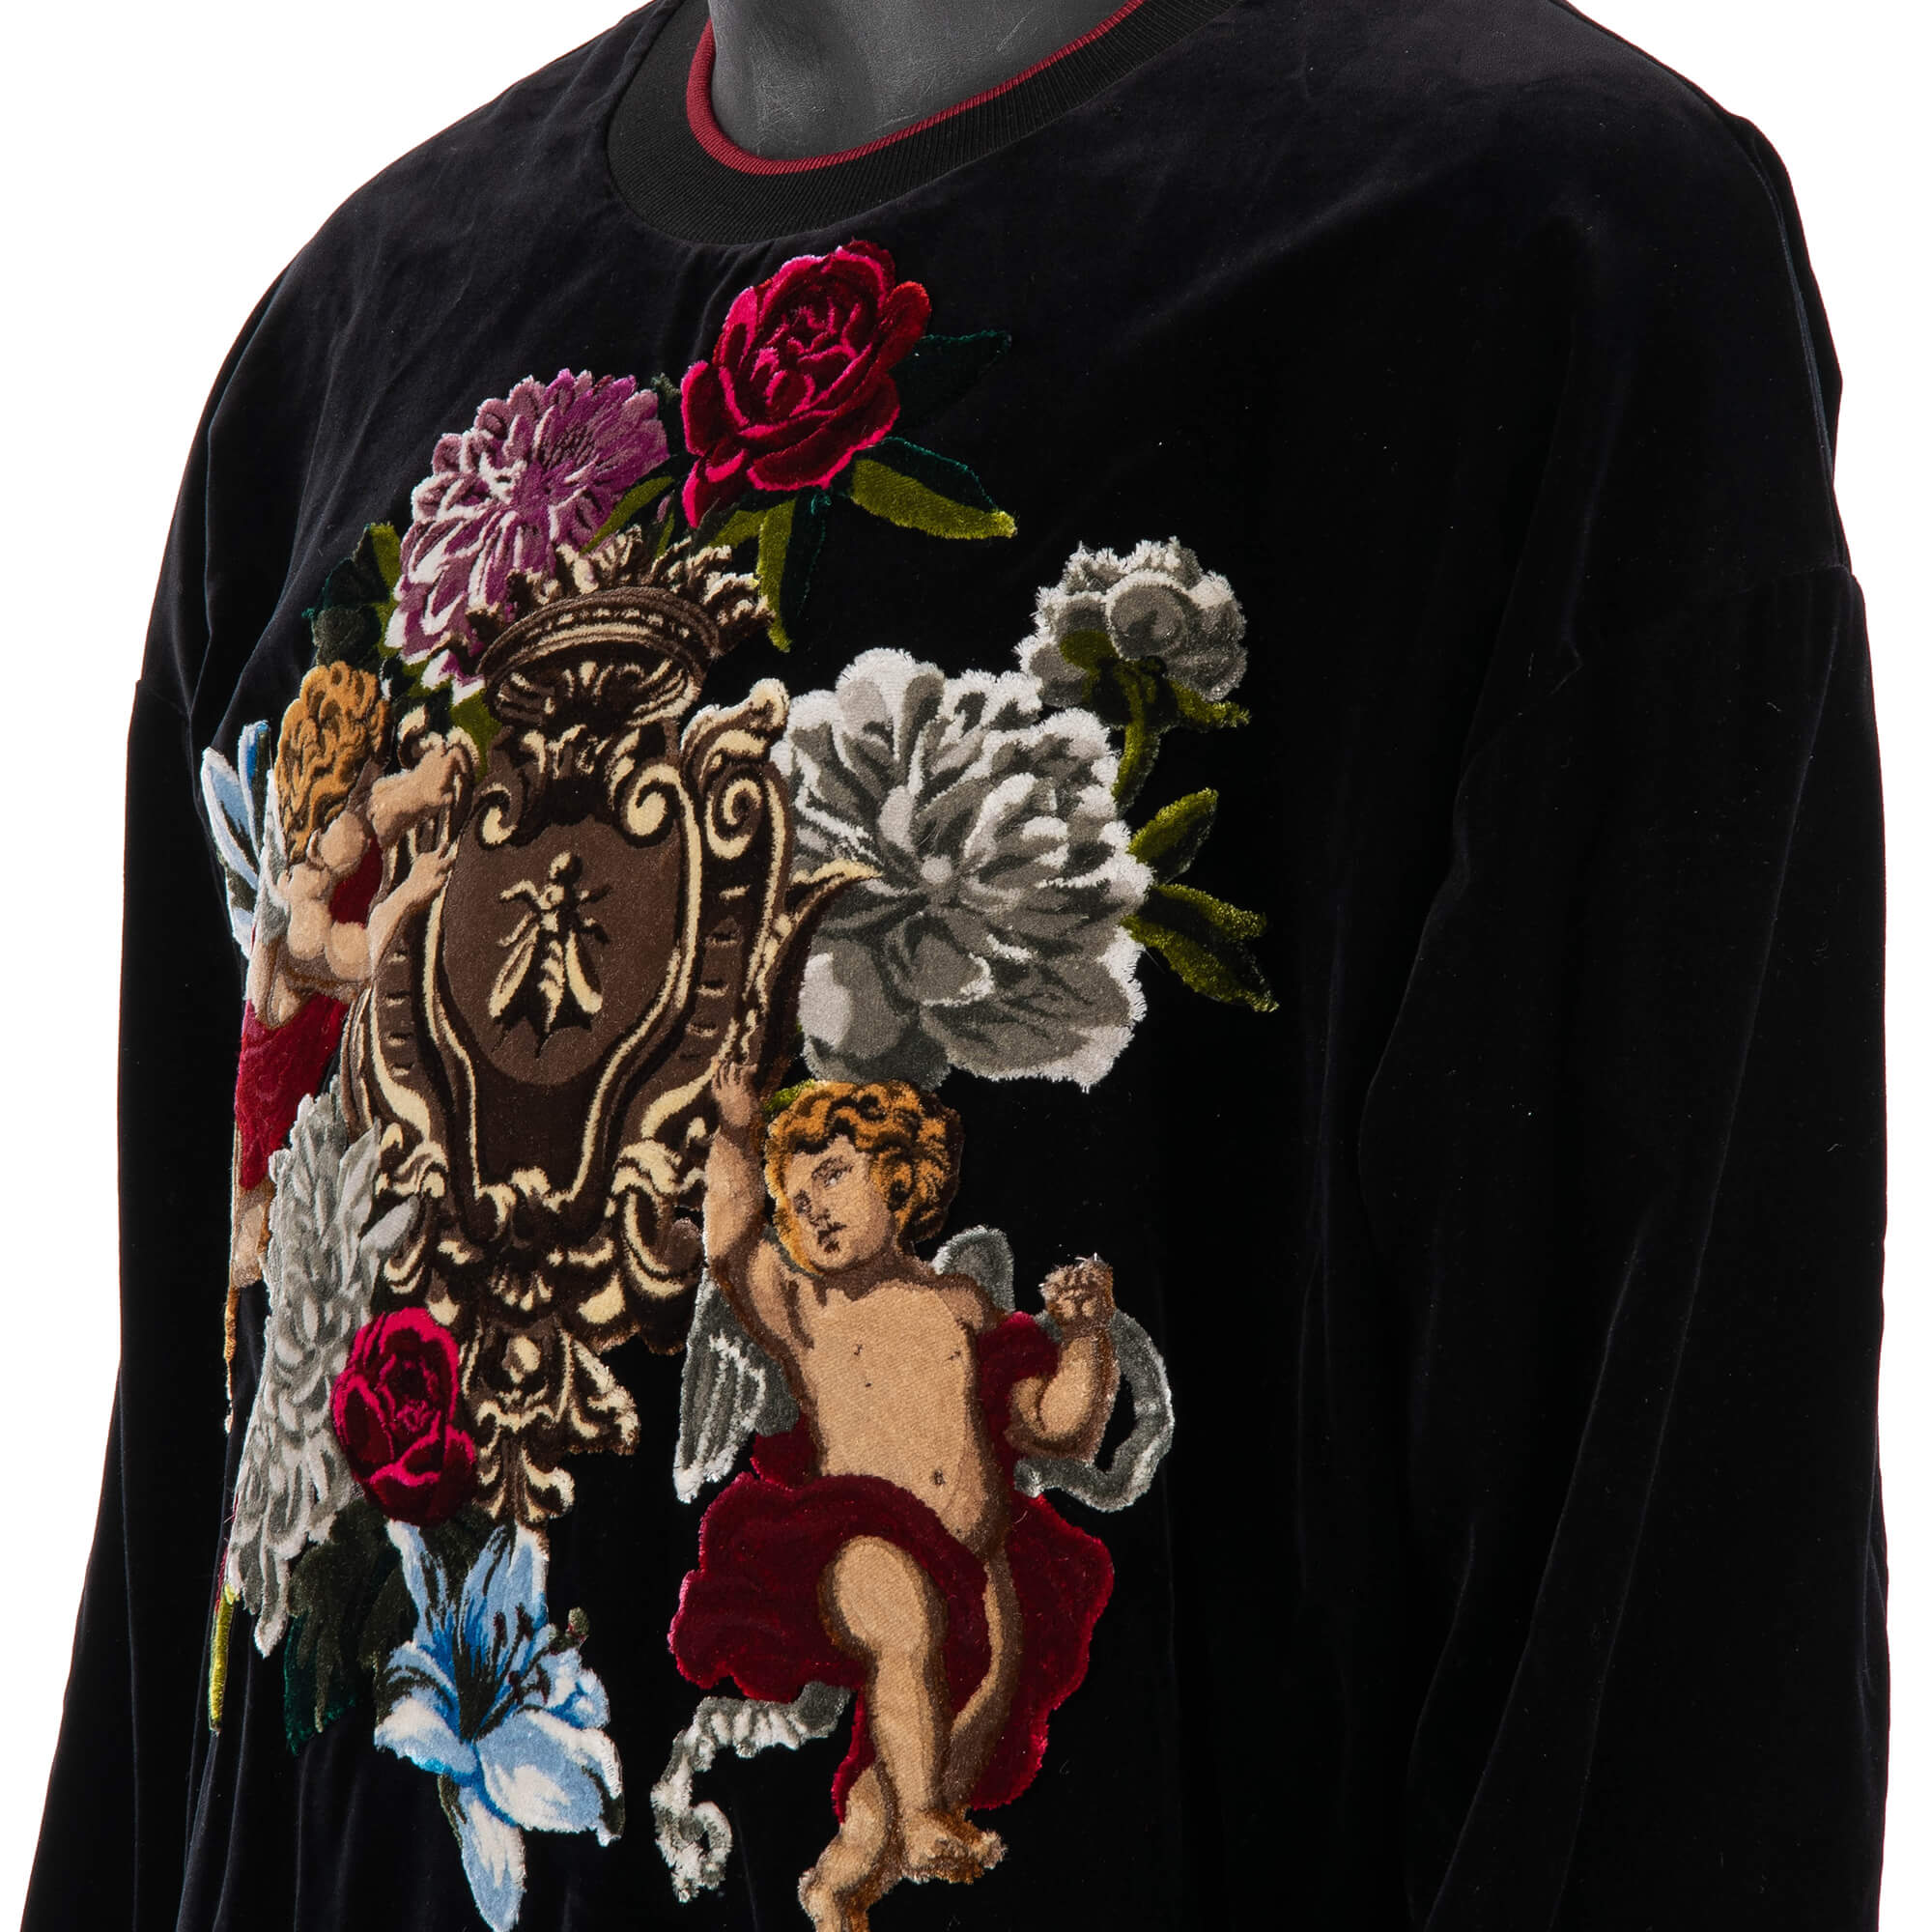 Velvet-Sweater-with-Baroque-Angels-and-Flowers-Application-Black-Red-6.jpg